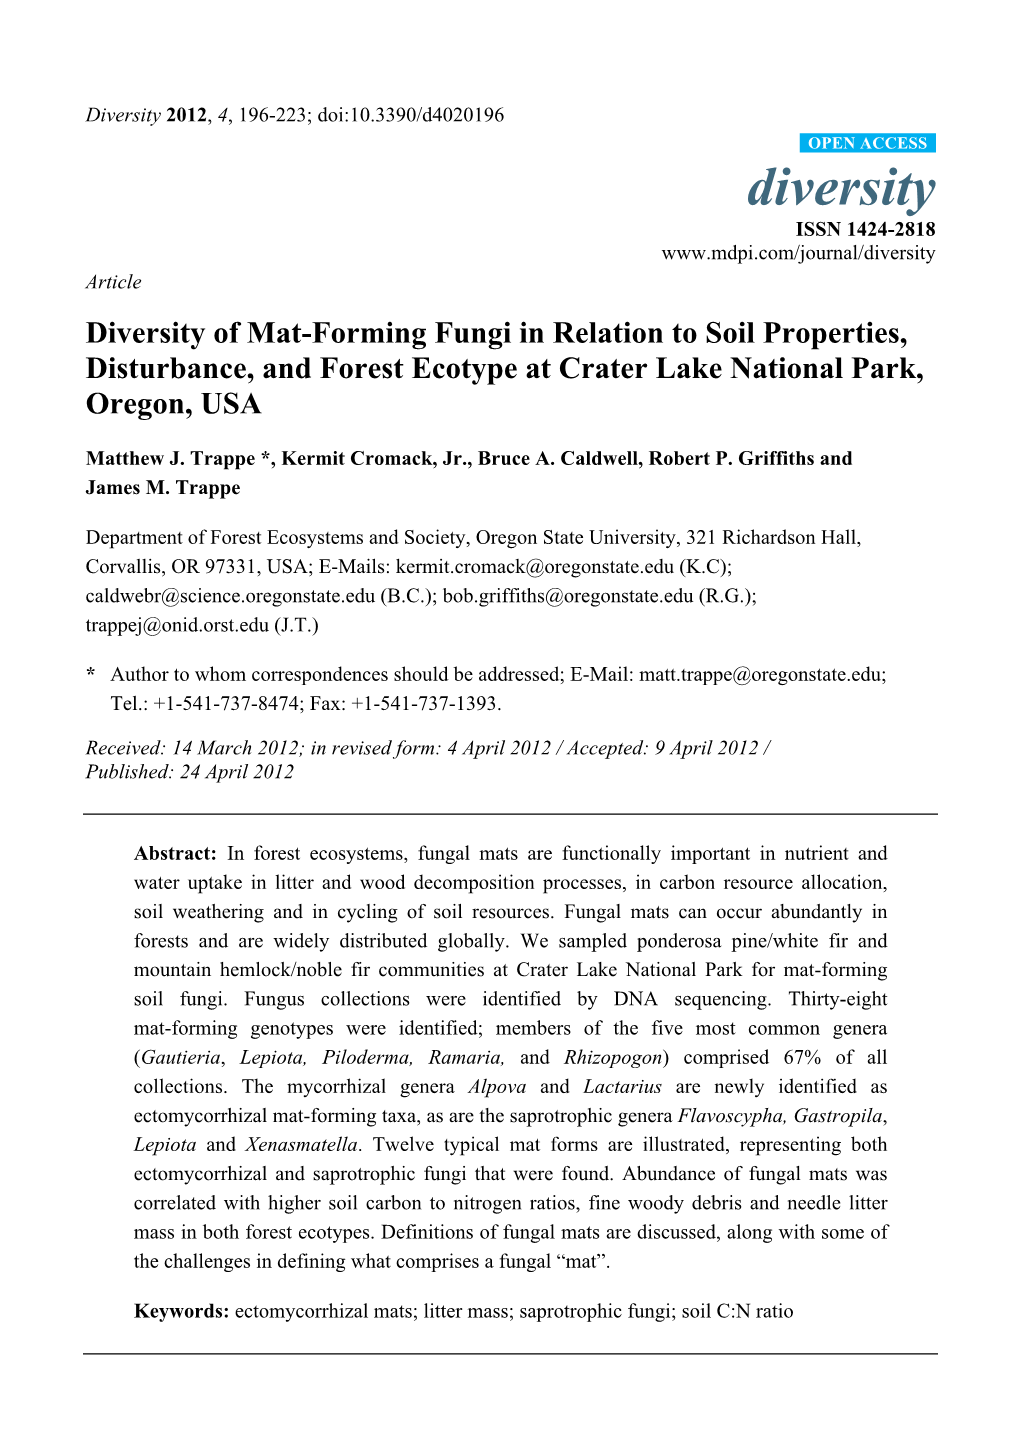 Diversity of Mat-Forming Fungi in Relation to Soil Properties, Disturbance, and Forest Ecotype at Crater Lake National Park, Oregon, USA